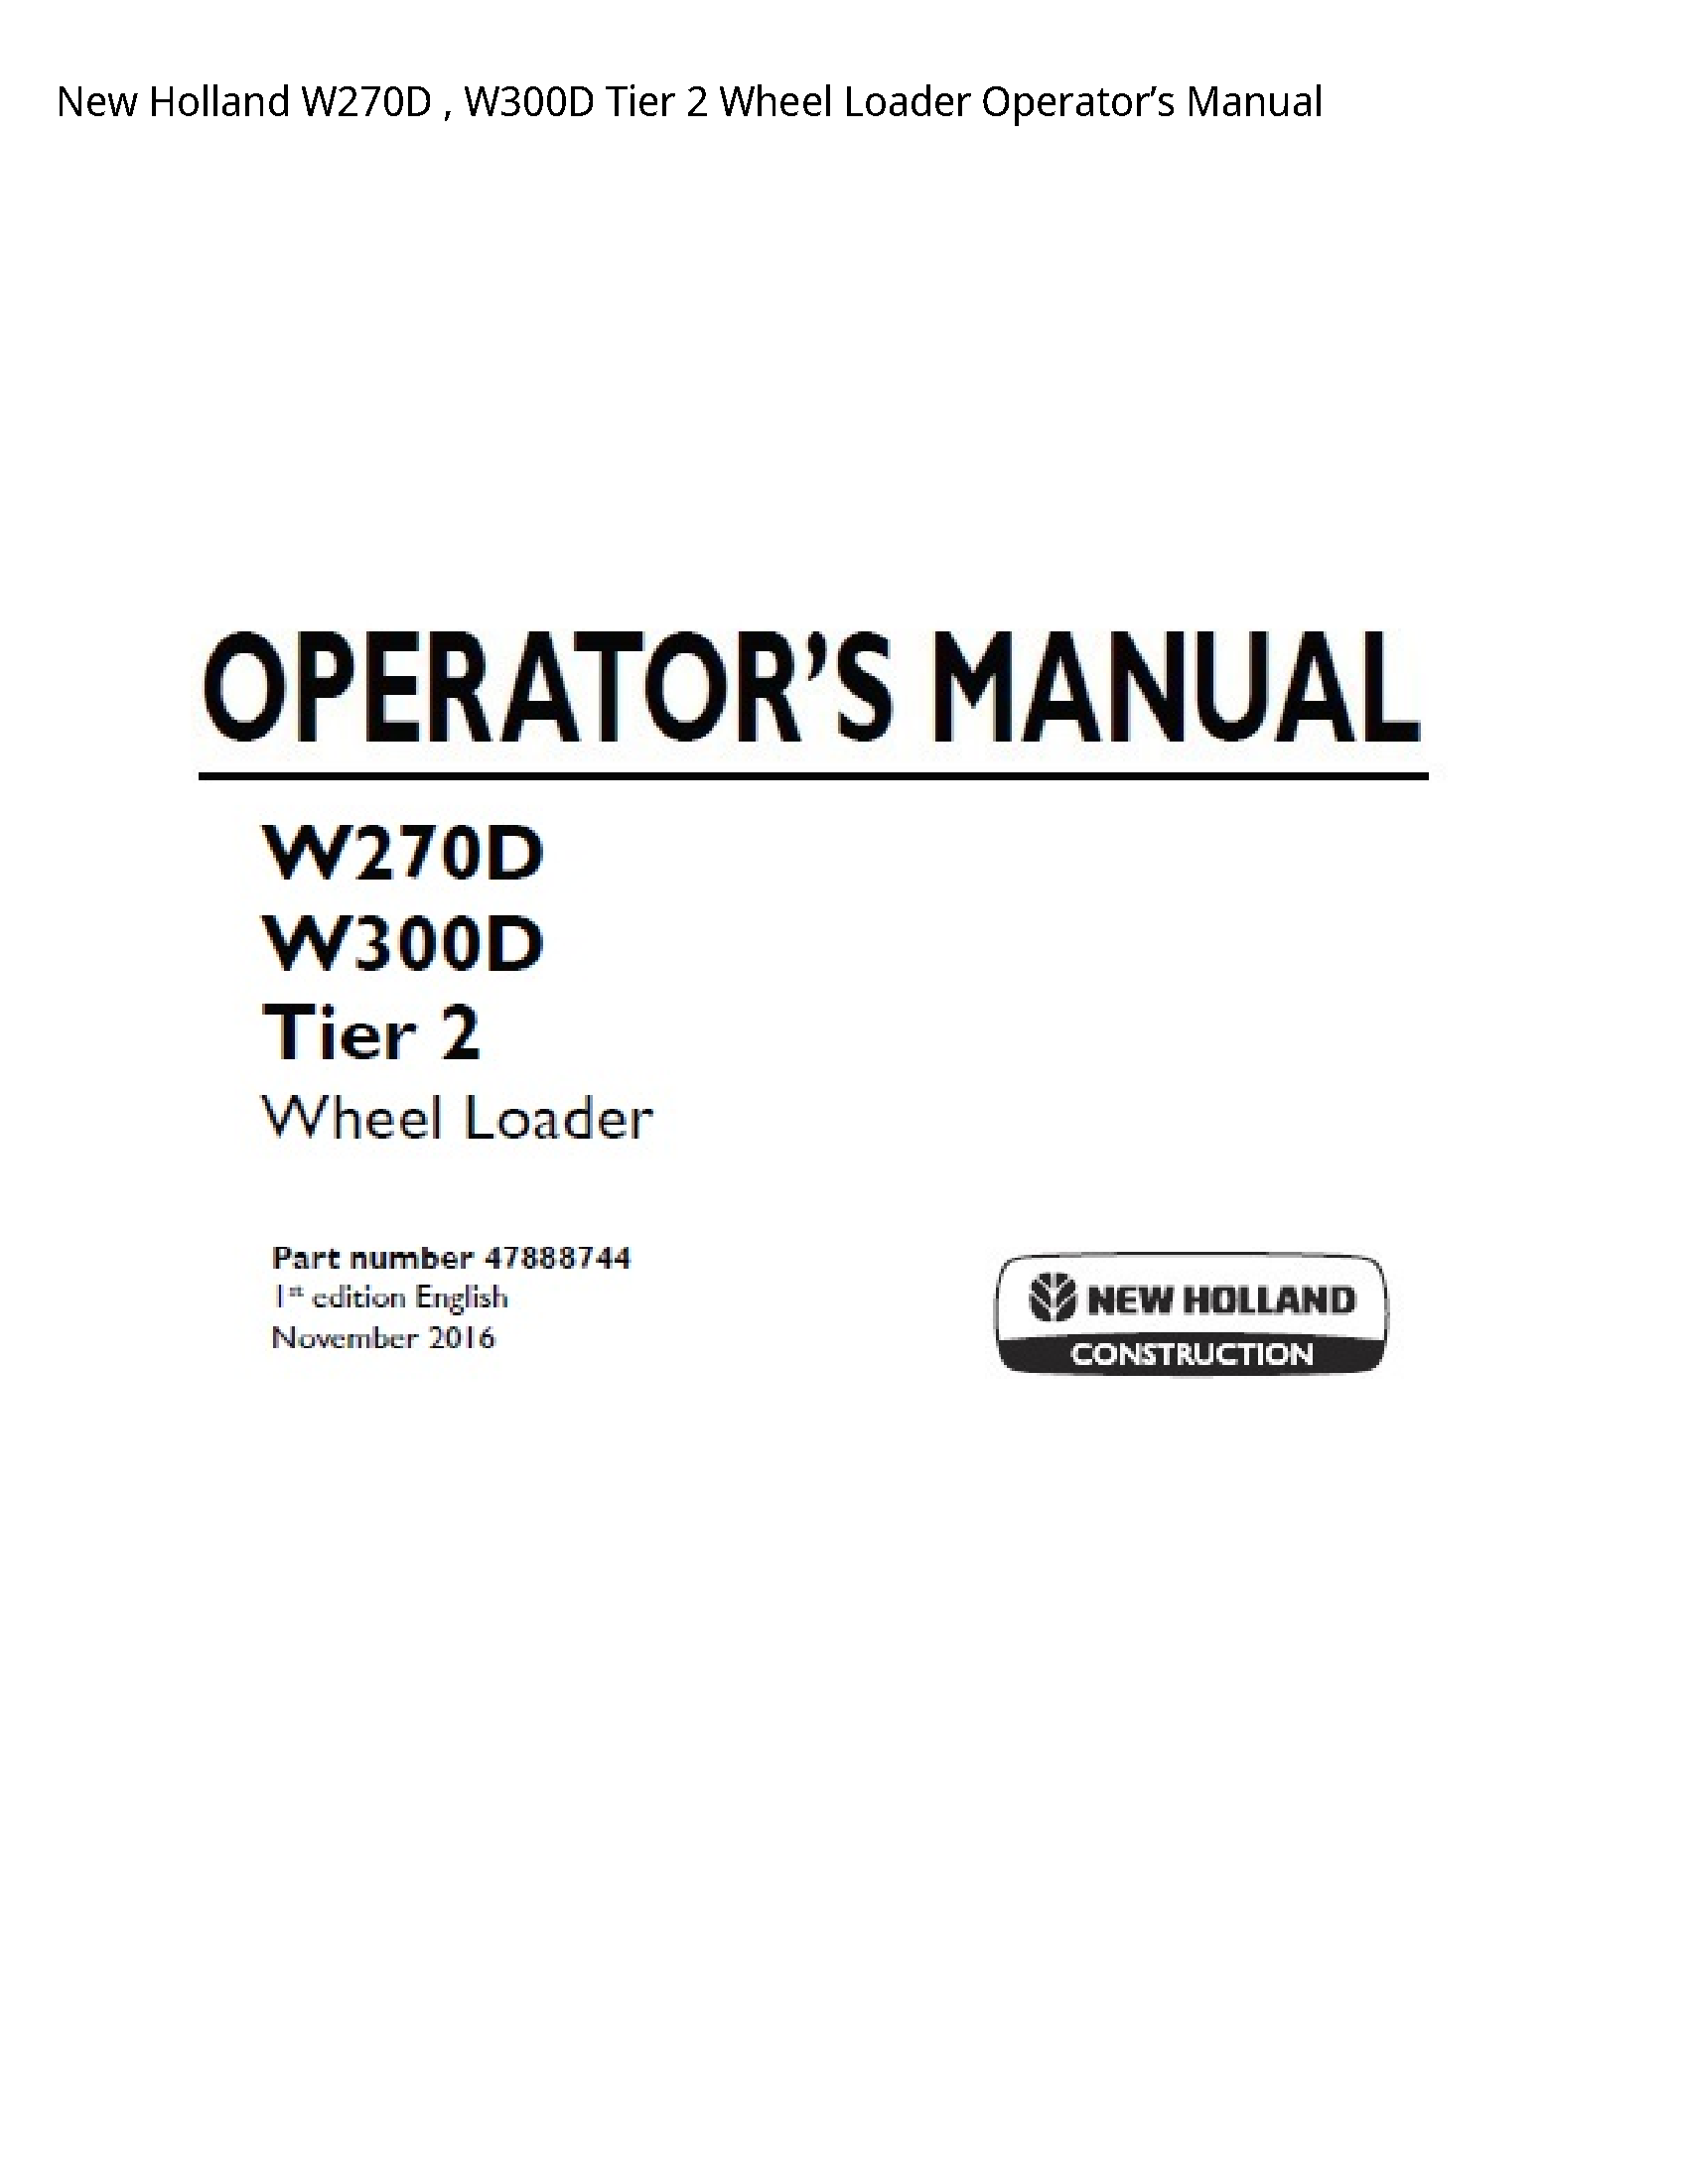 New Holland W270D Tier Wheel Loader Operator’s manual